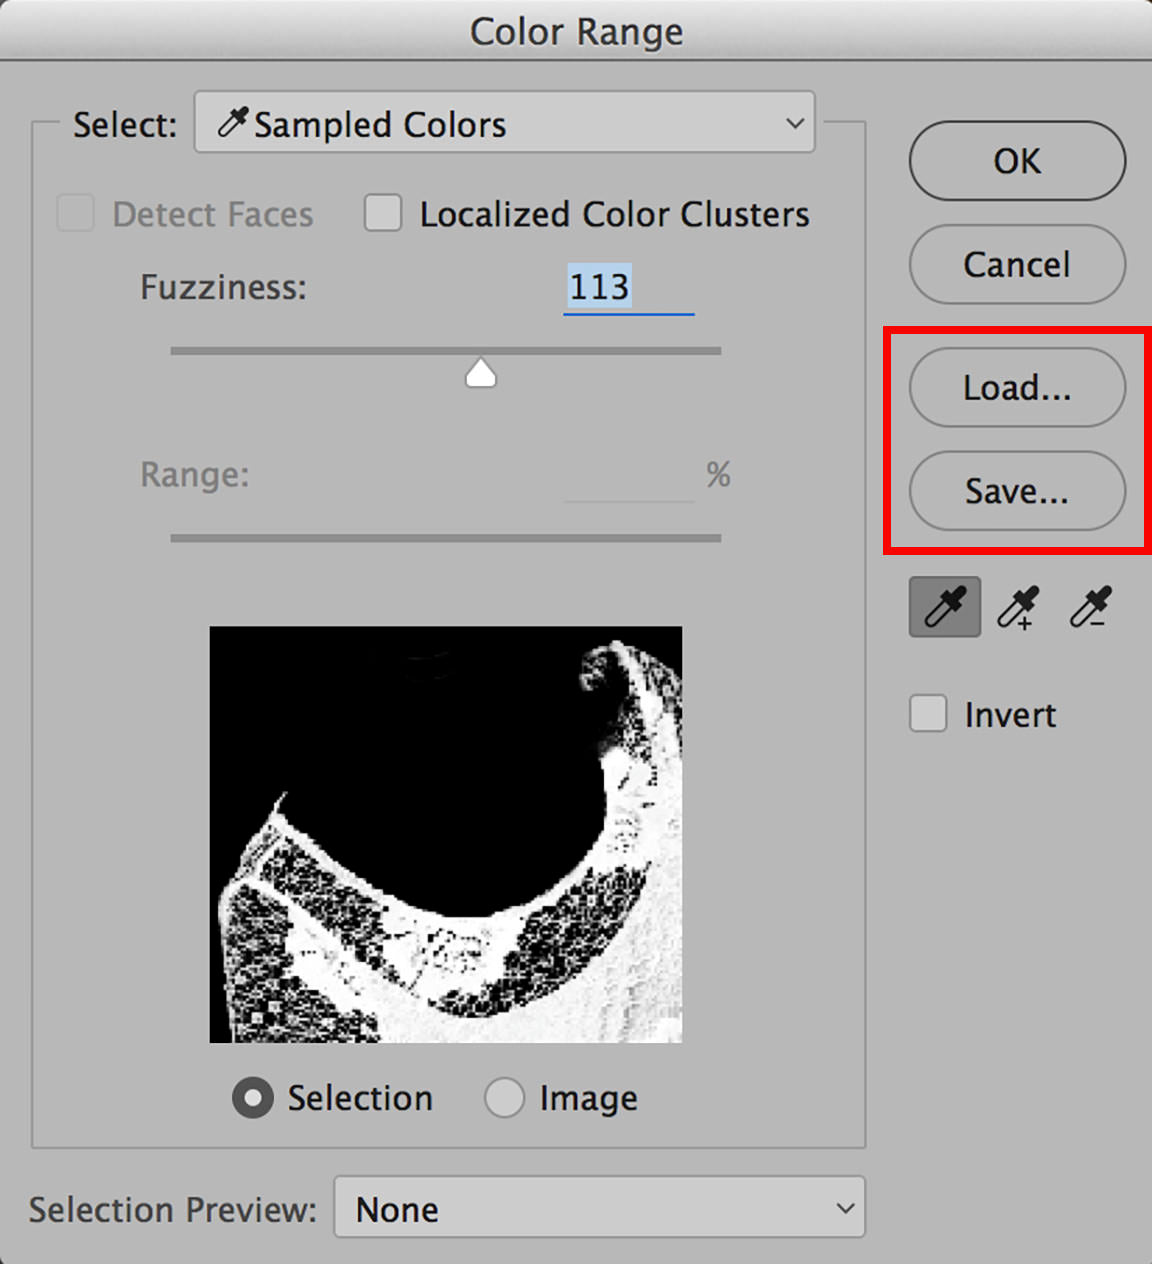 Load and Save options in the Color Range tool